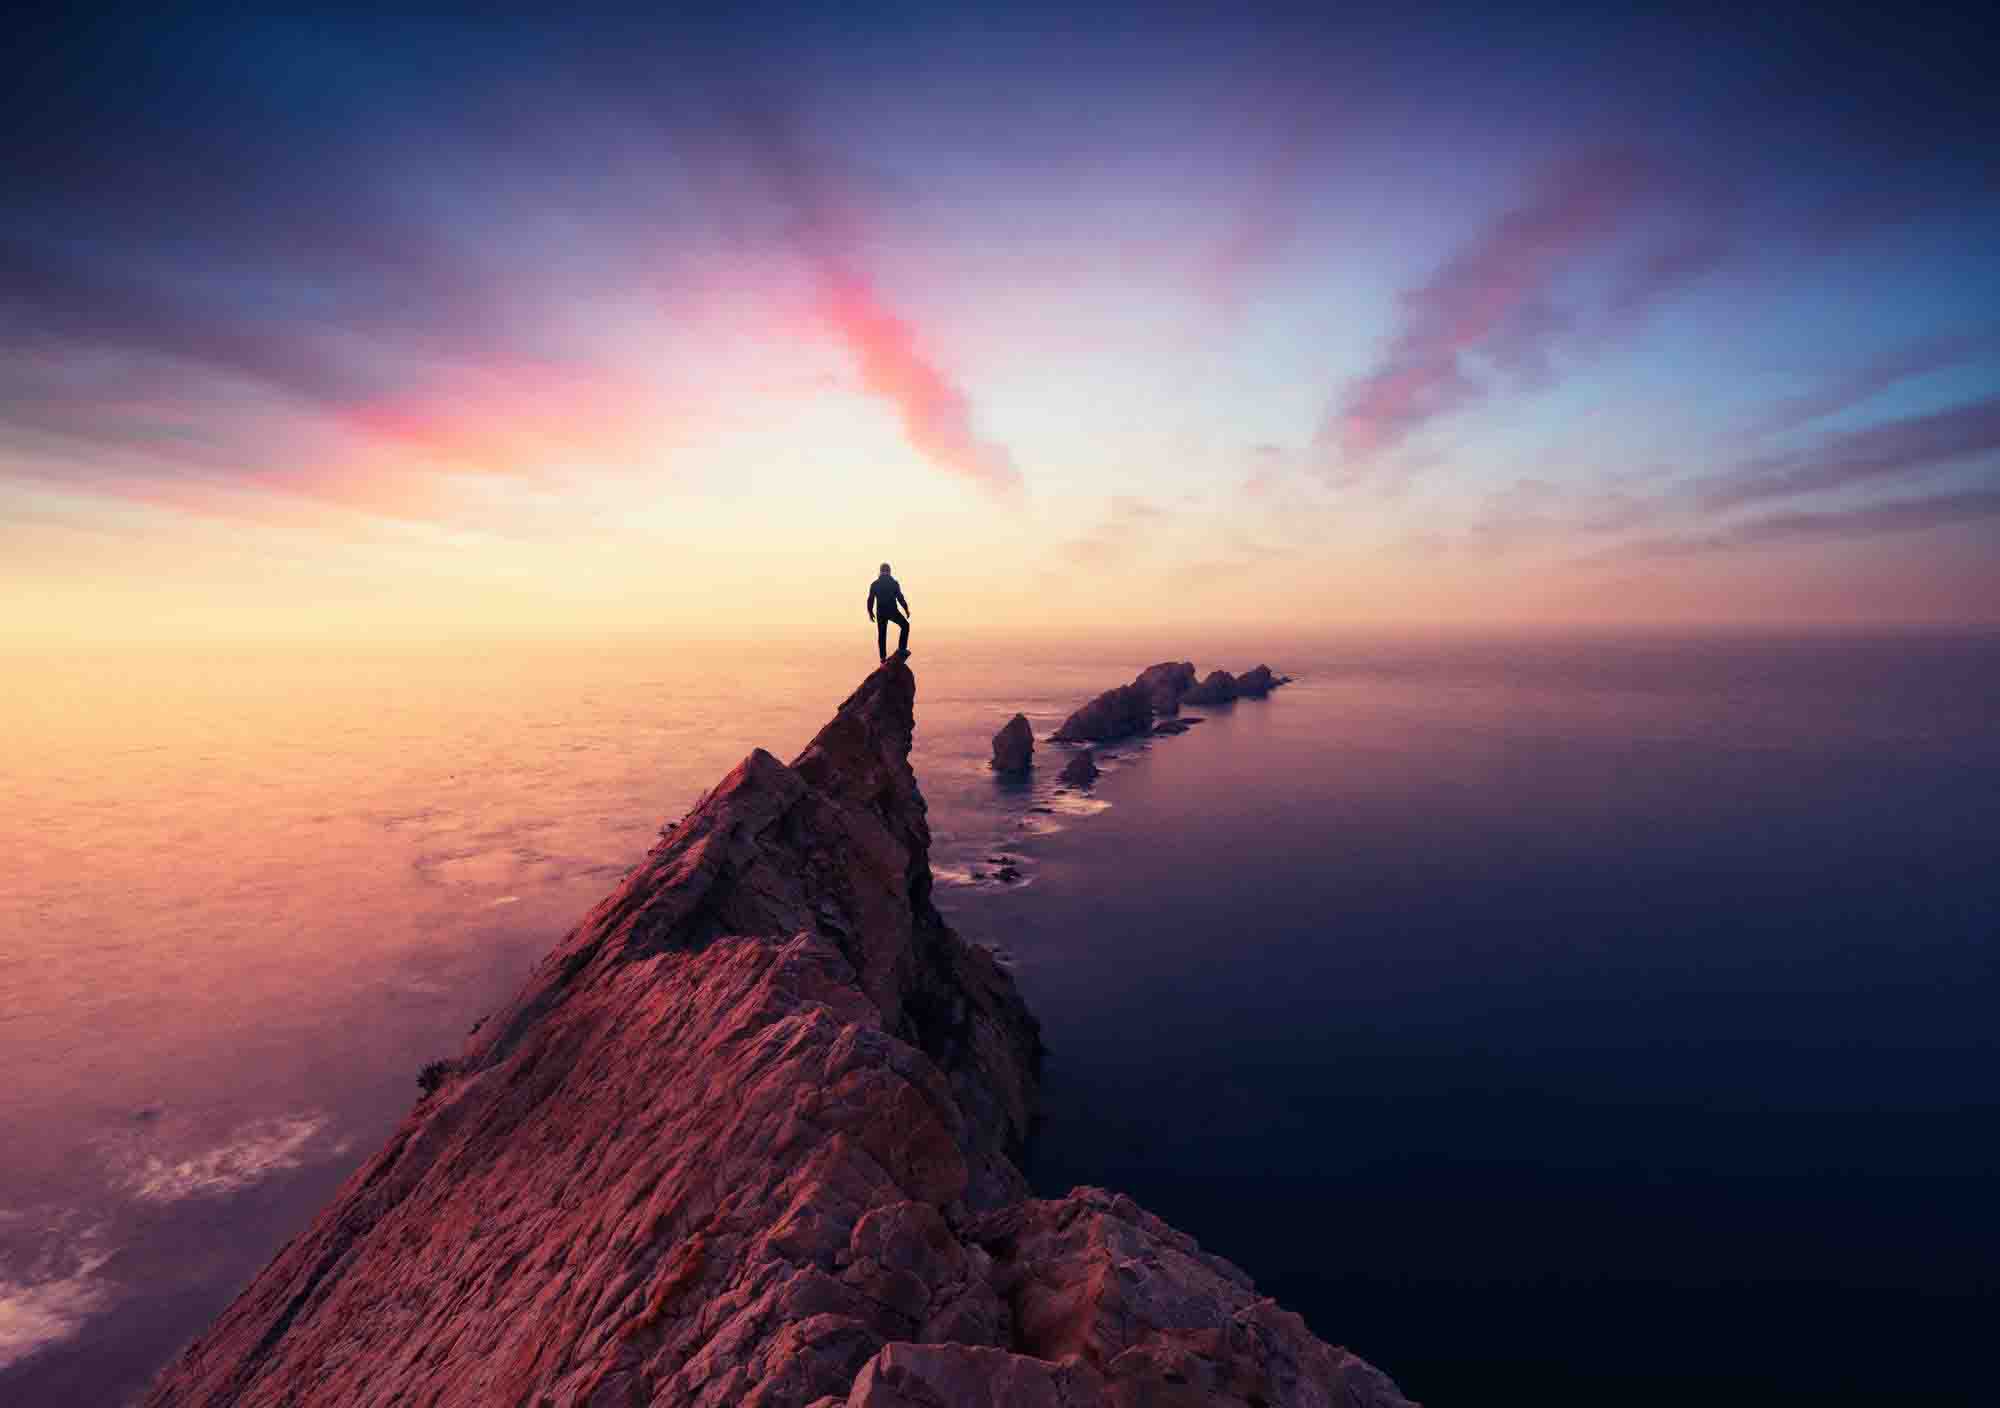 Image of a person standing on top of a mountain peak at sunset looking out at sea